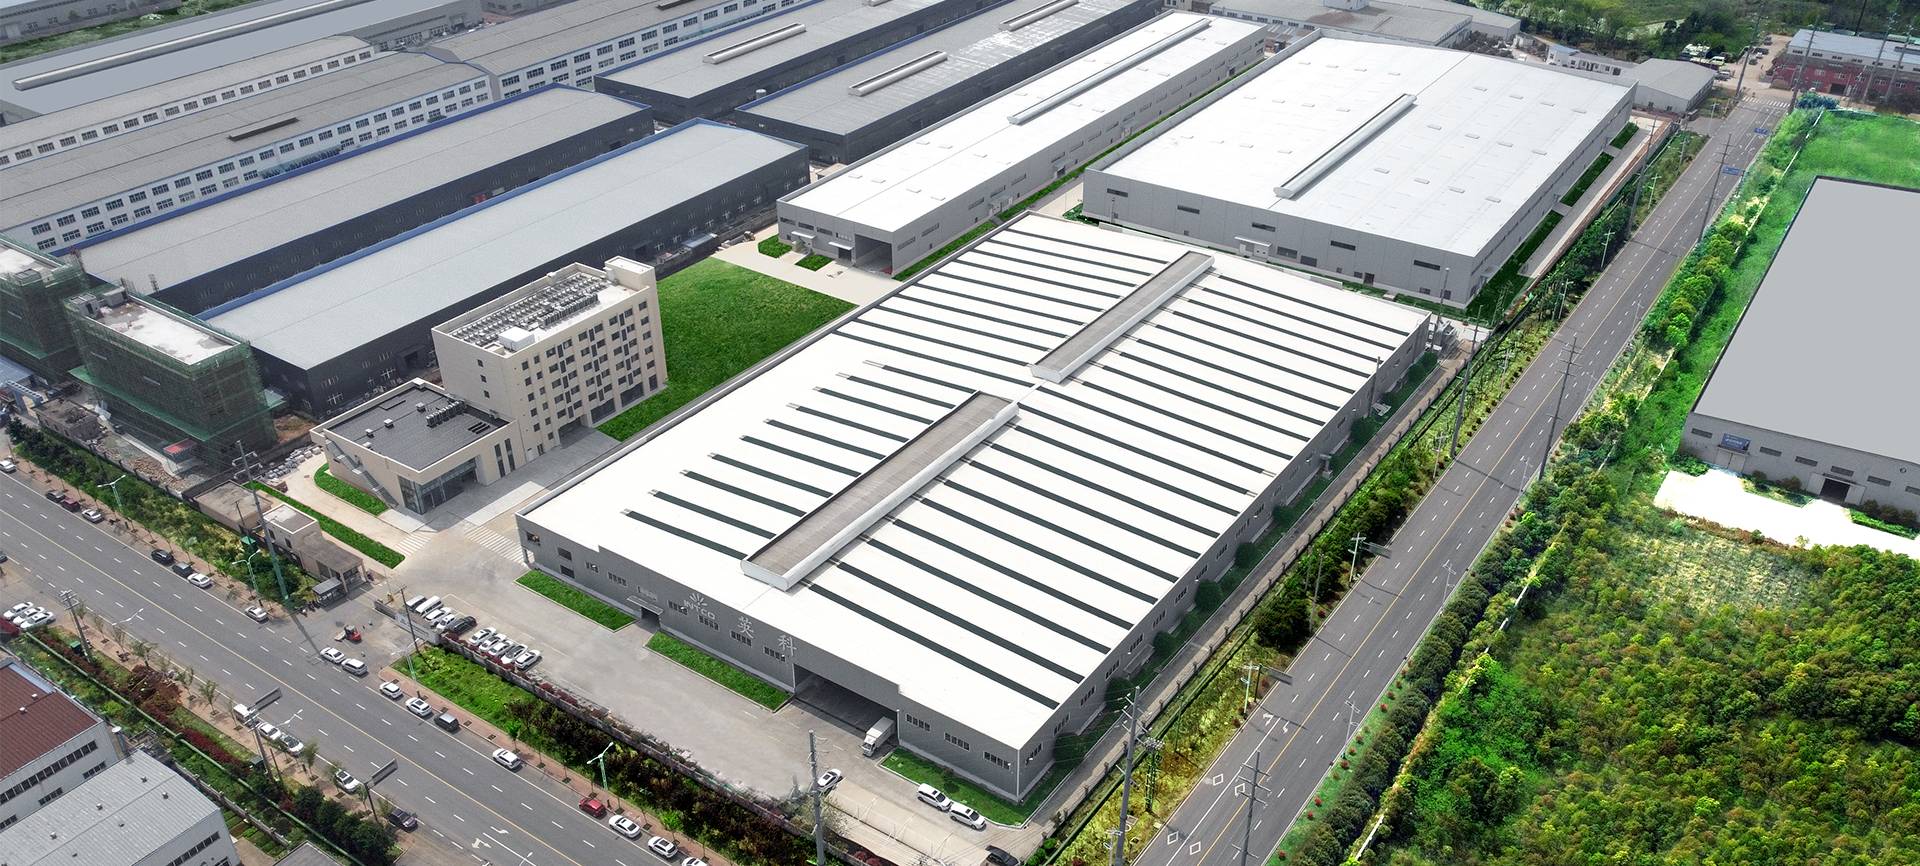 Lu’an Intco, the production base of polystyrene picture frames mouldings.